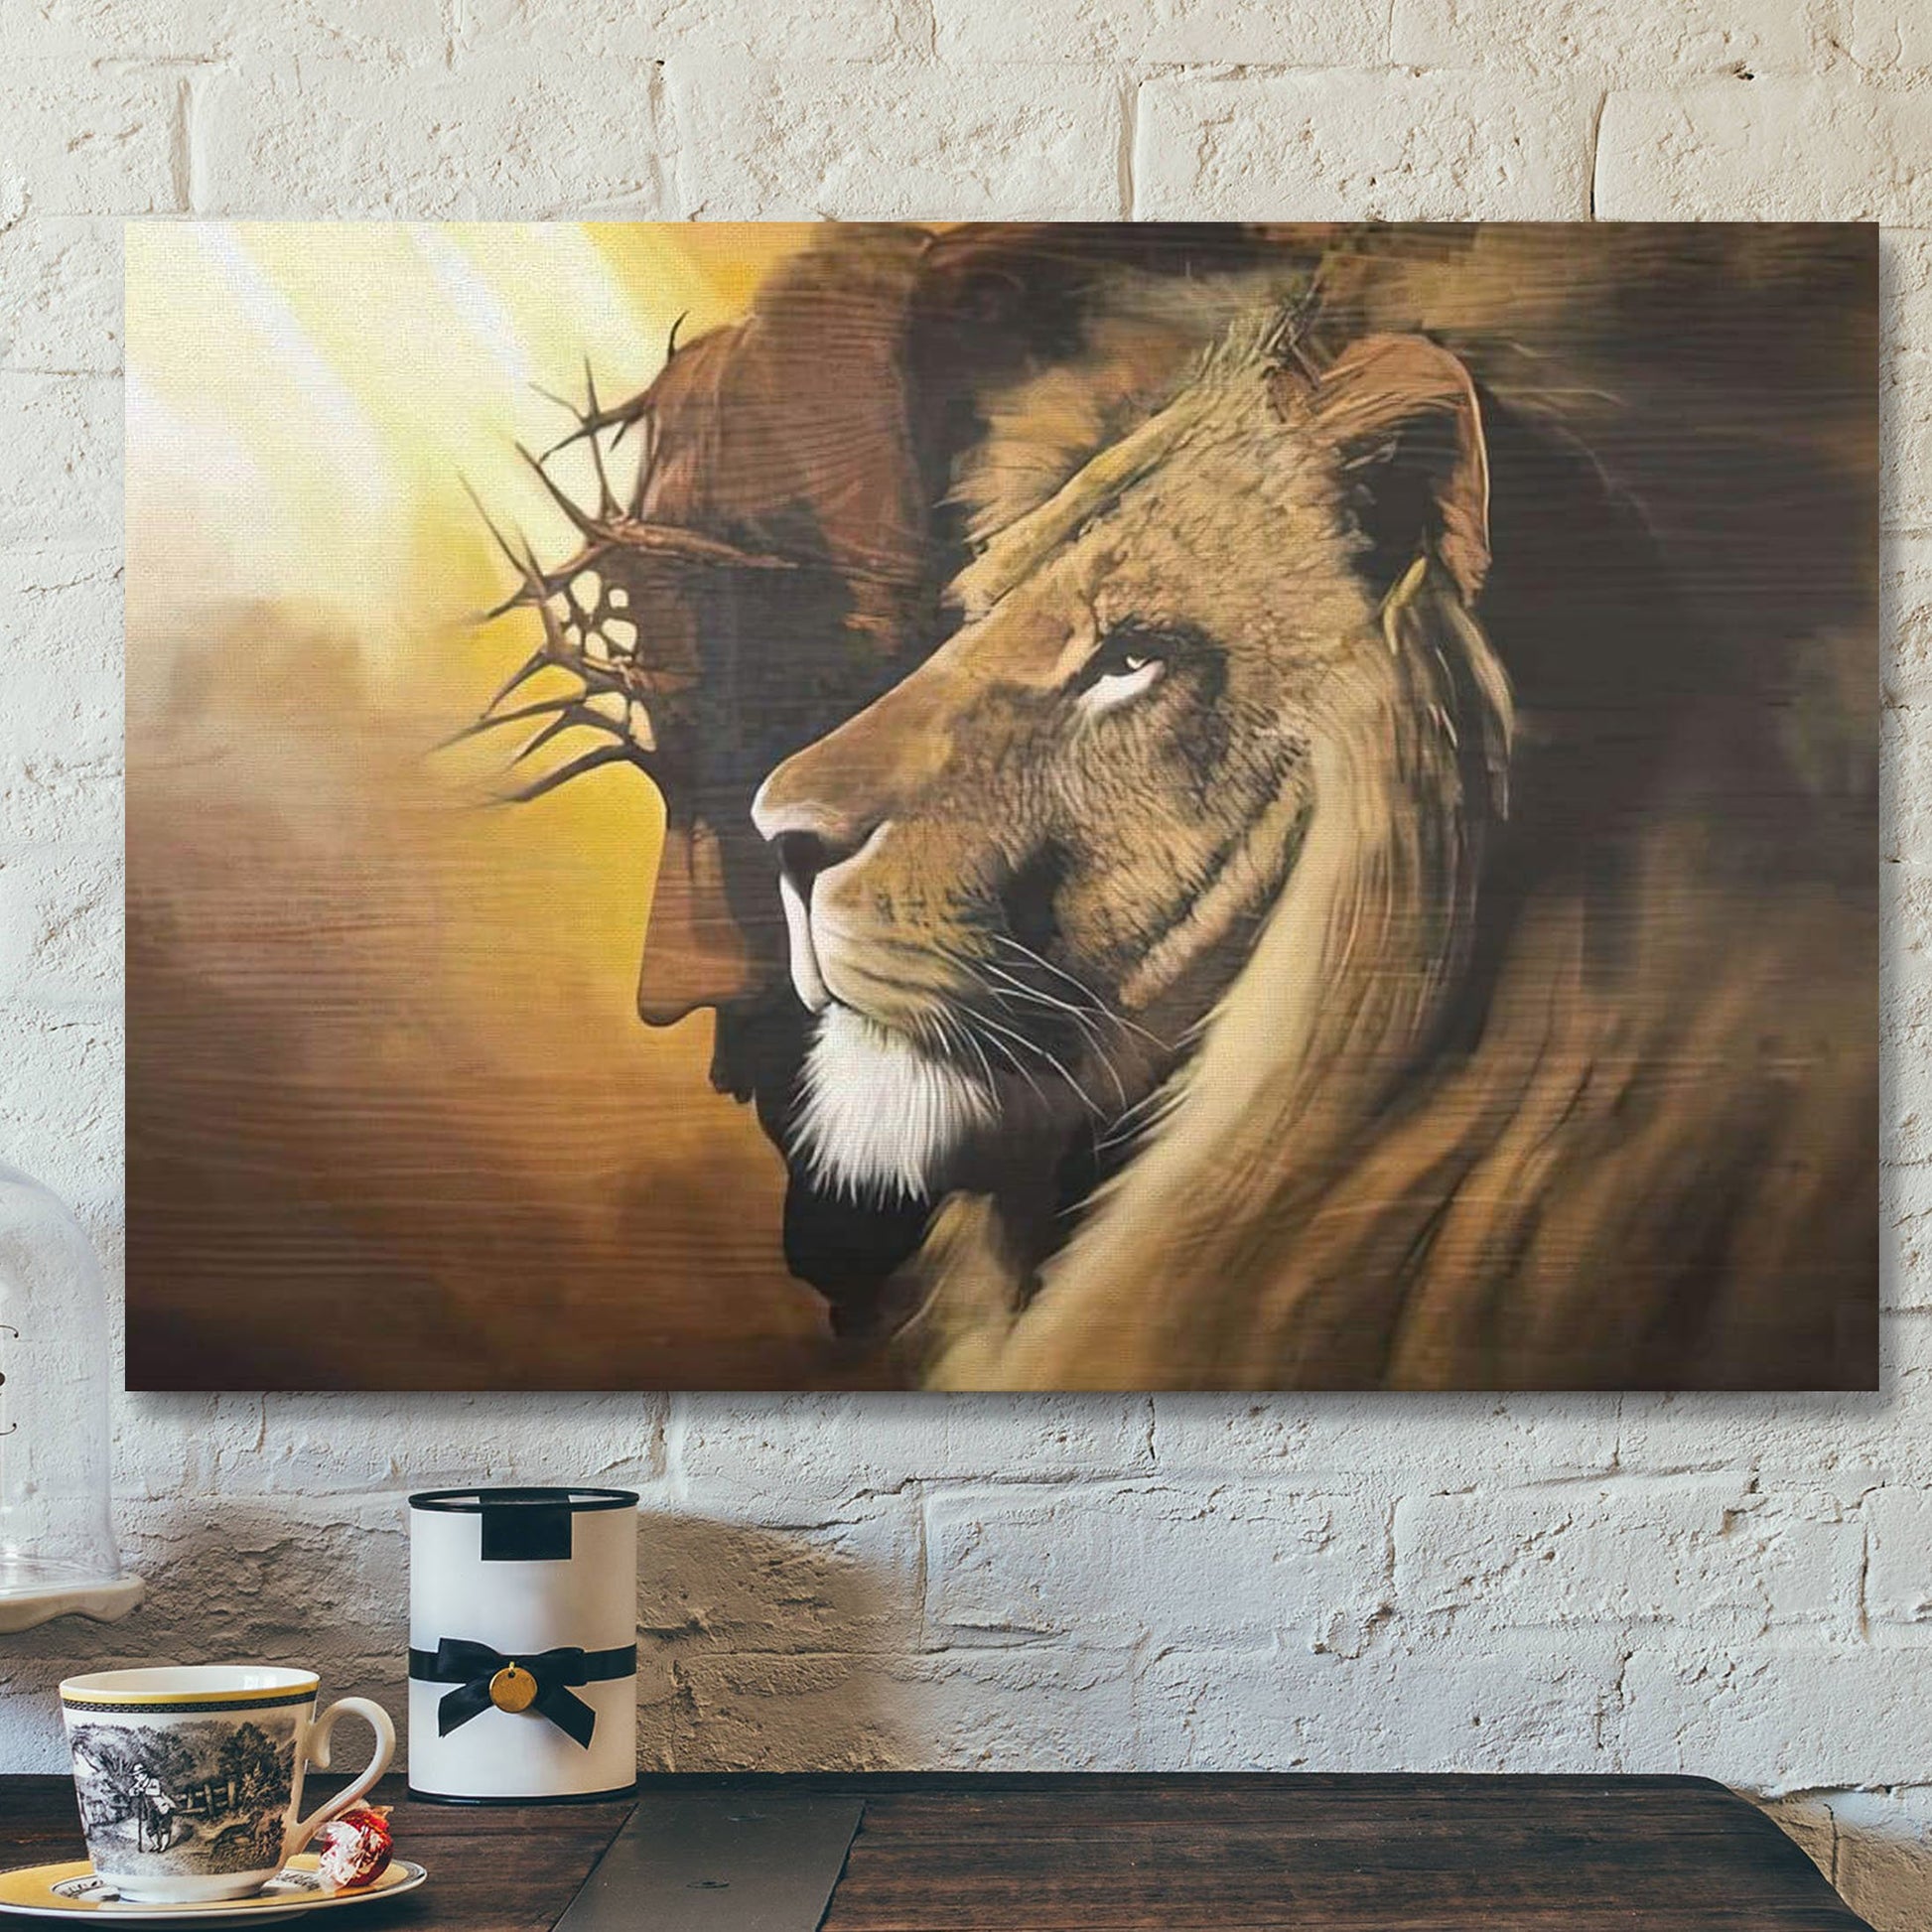 Jesus And Lion Picture - Christ And Lion - The Lion Of Judah Wall Art - Half Jesus Half Lion Canvas - Christian Wall Art - Ciaocustom